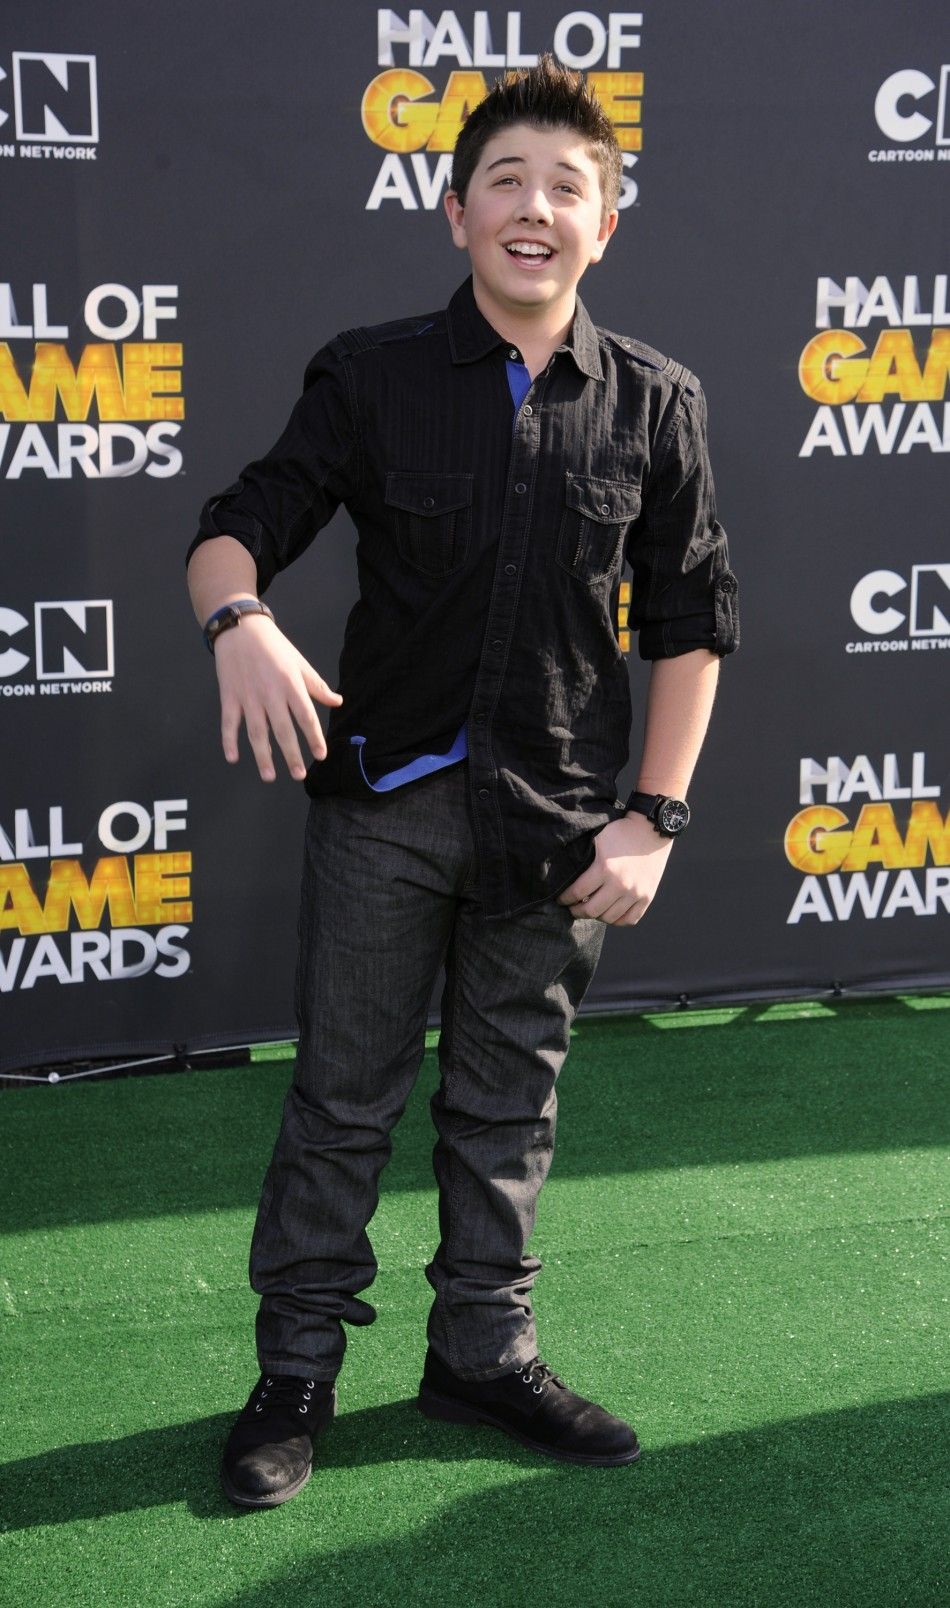 Bradley Steven Perry arrives at the Cartoon Networks Hall of Game Awards